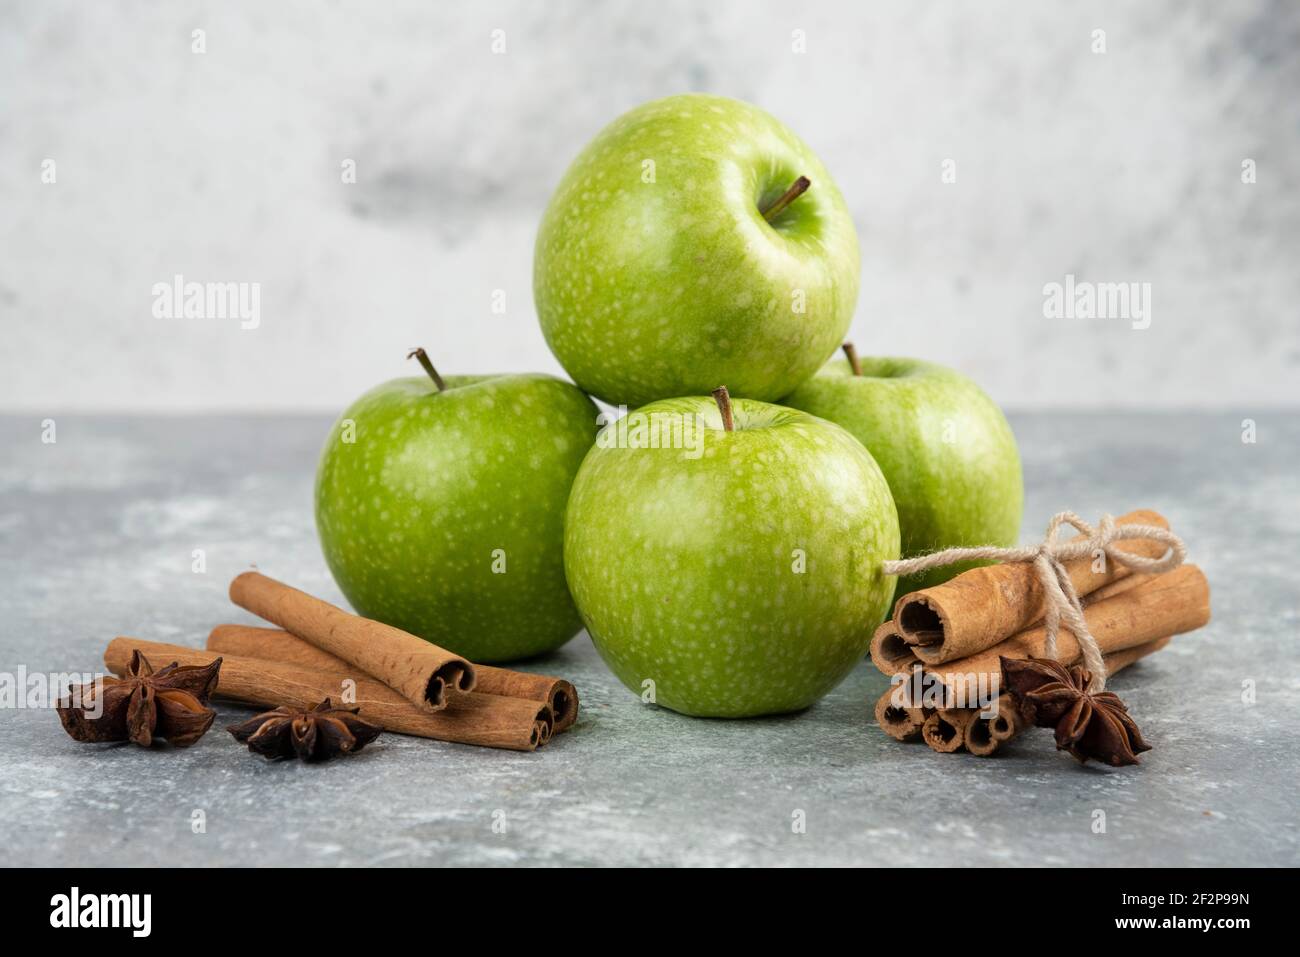 Whole green apples and cinnamon sticks on marble background Stock Photo